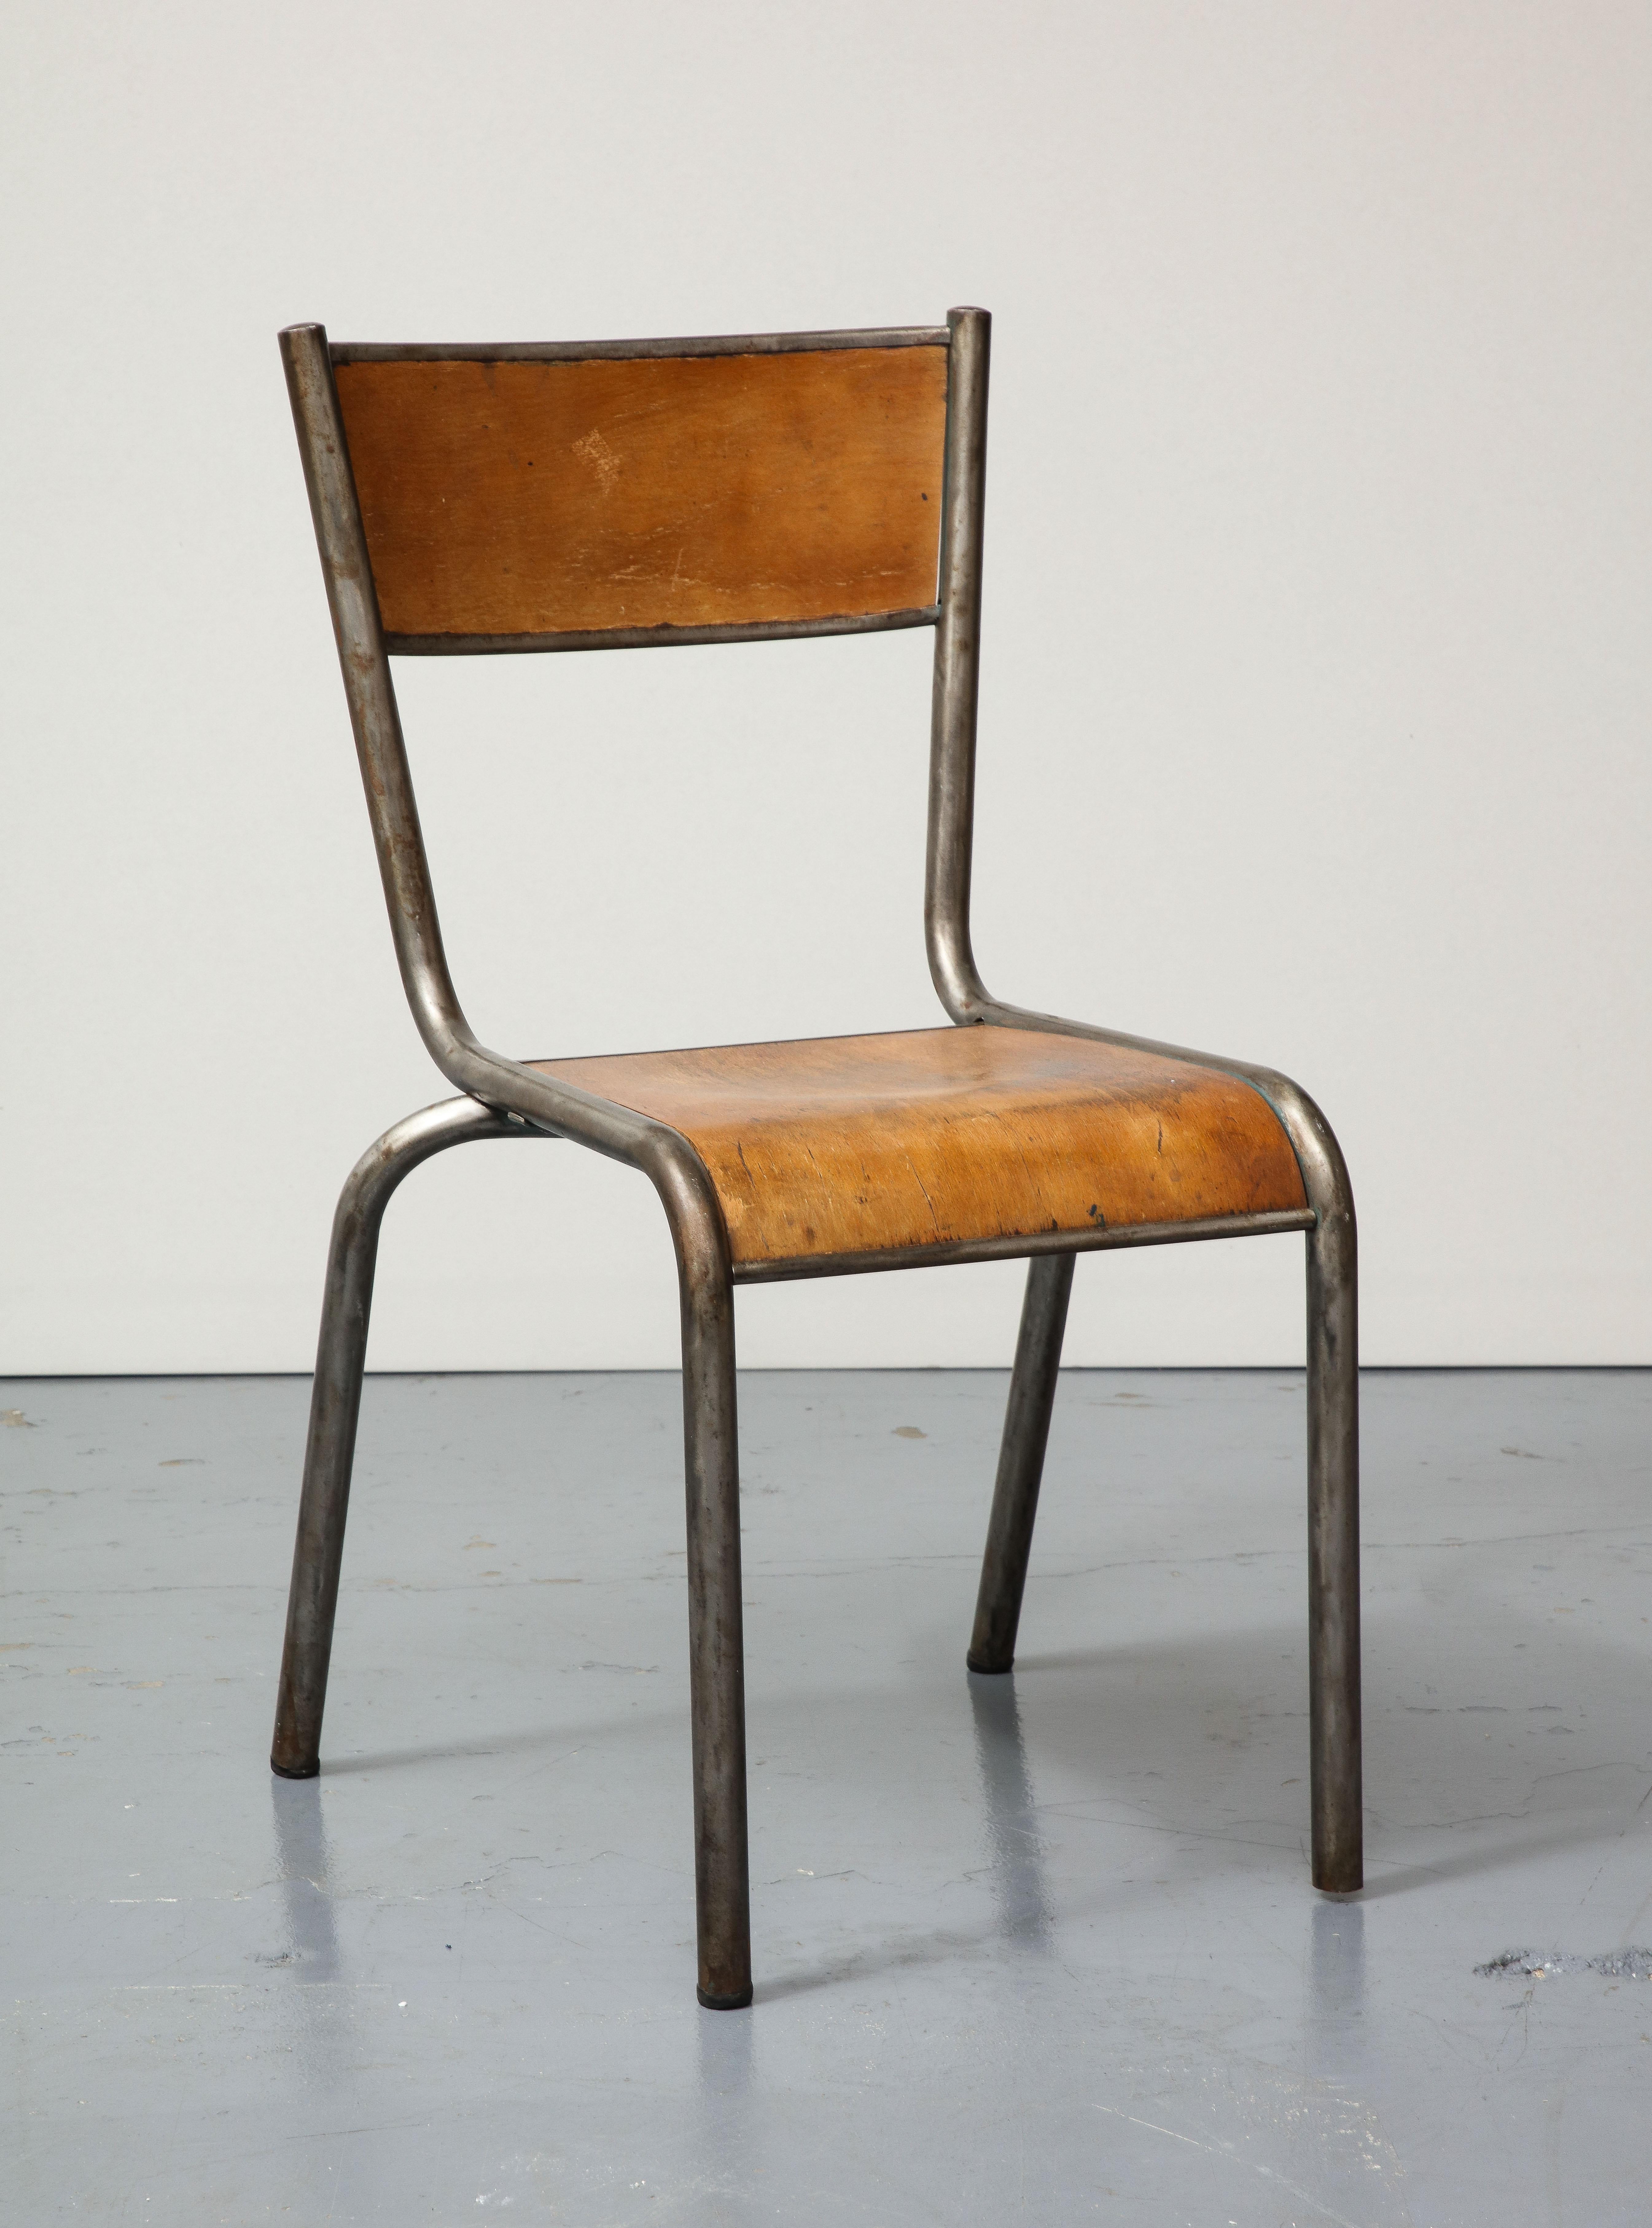 Two available; priced individually.

Rustic, beautifully patinated chair with tubular steel and bent wood.